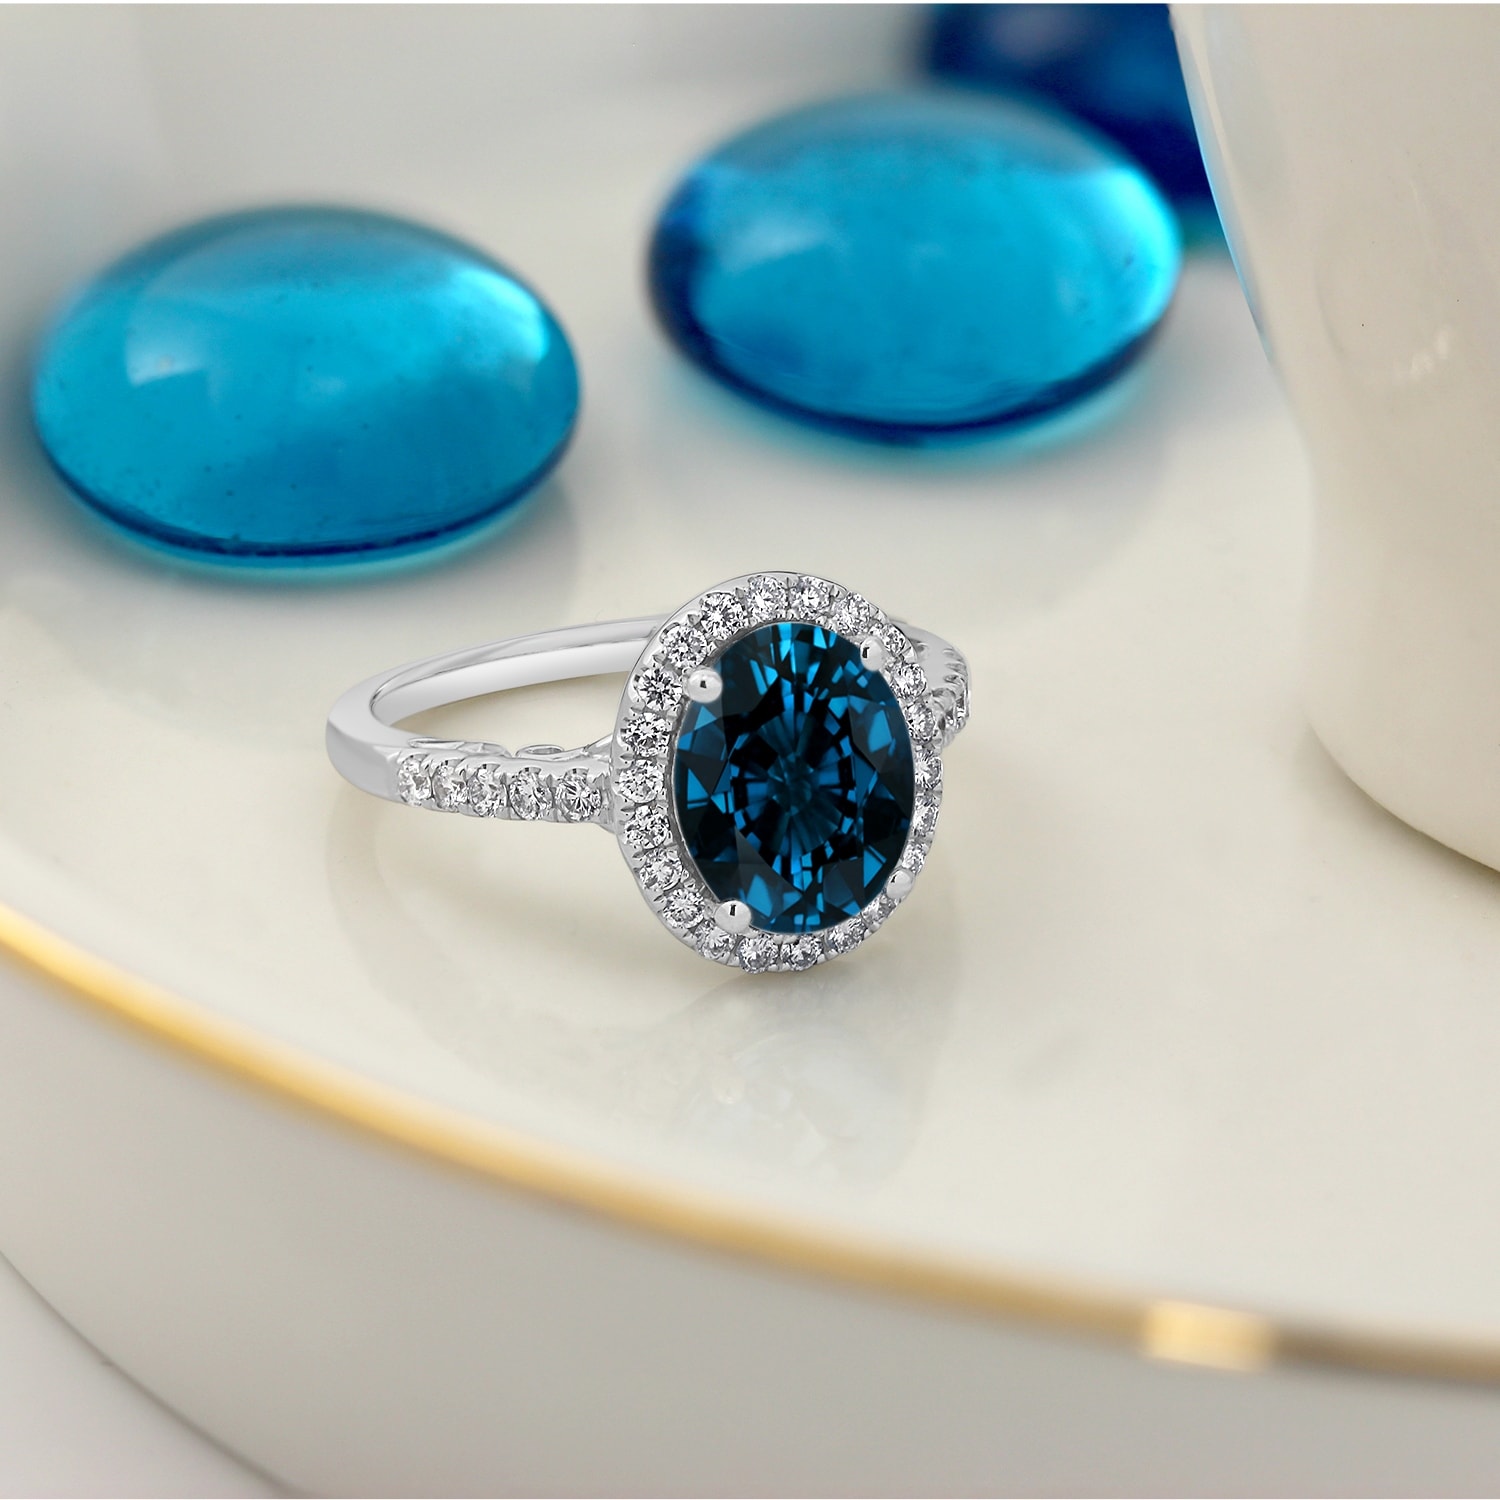 Oval blue topaz and diamond ring cuwl standard license